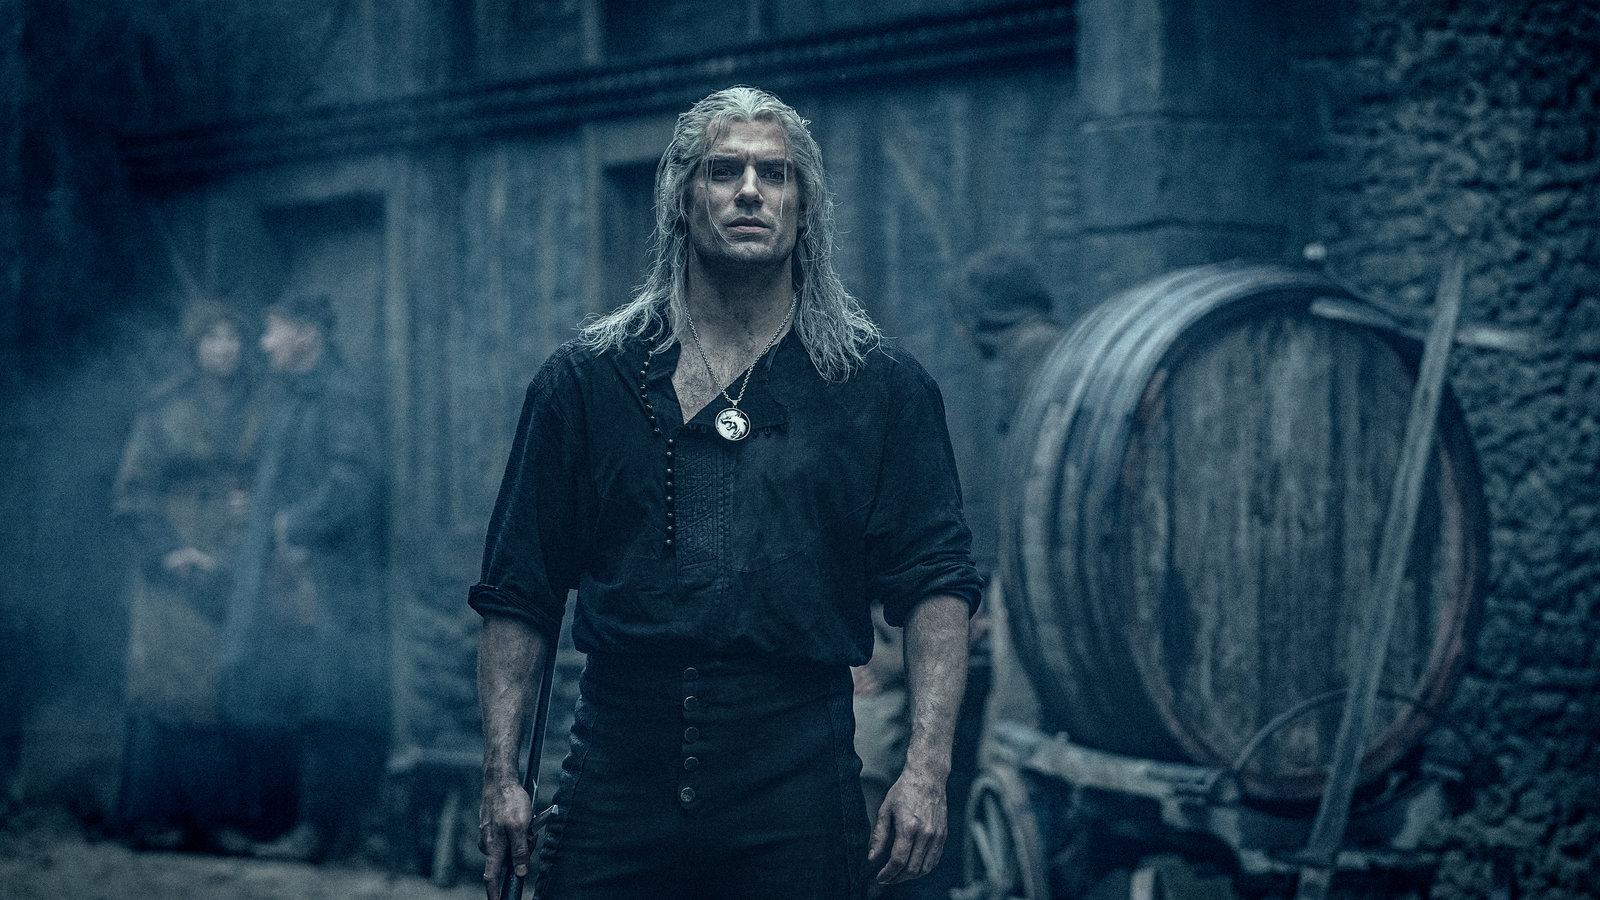 Review: Netflix Sends 'The Witcher' Into the Fantasy Fray